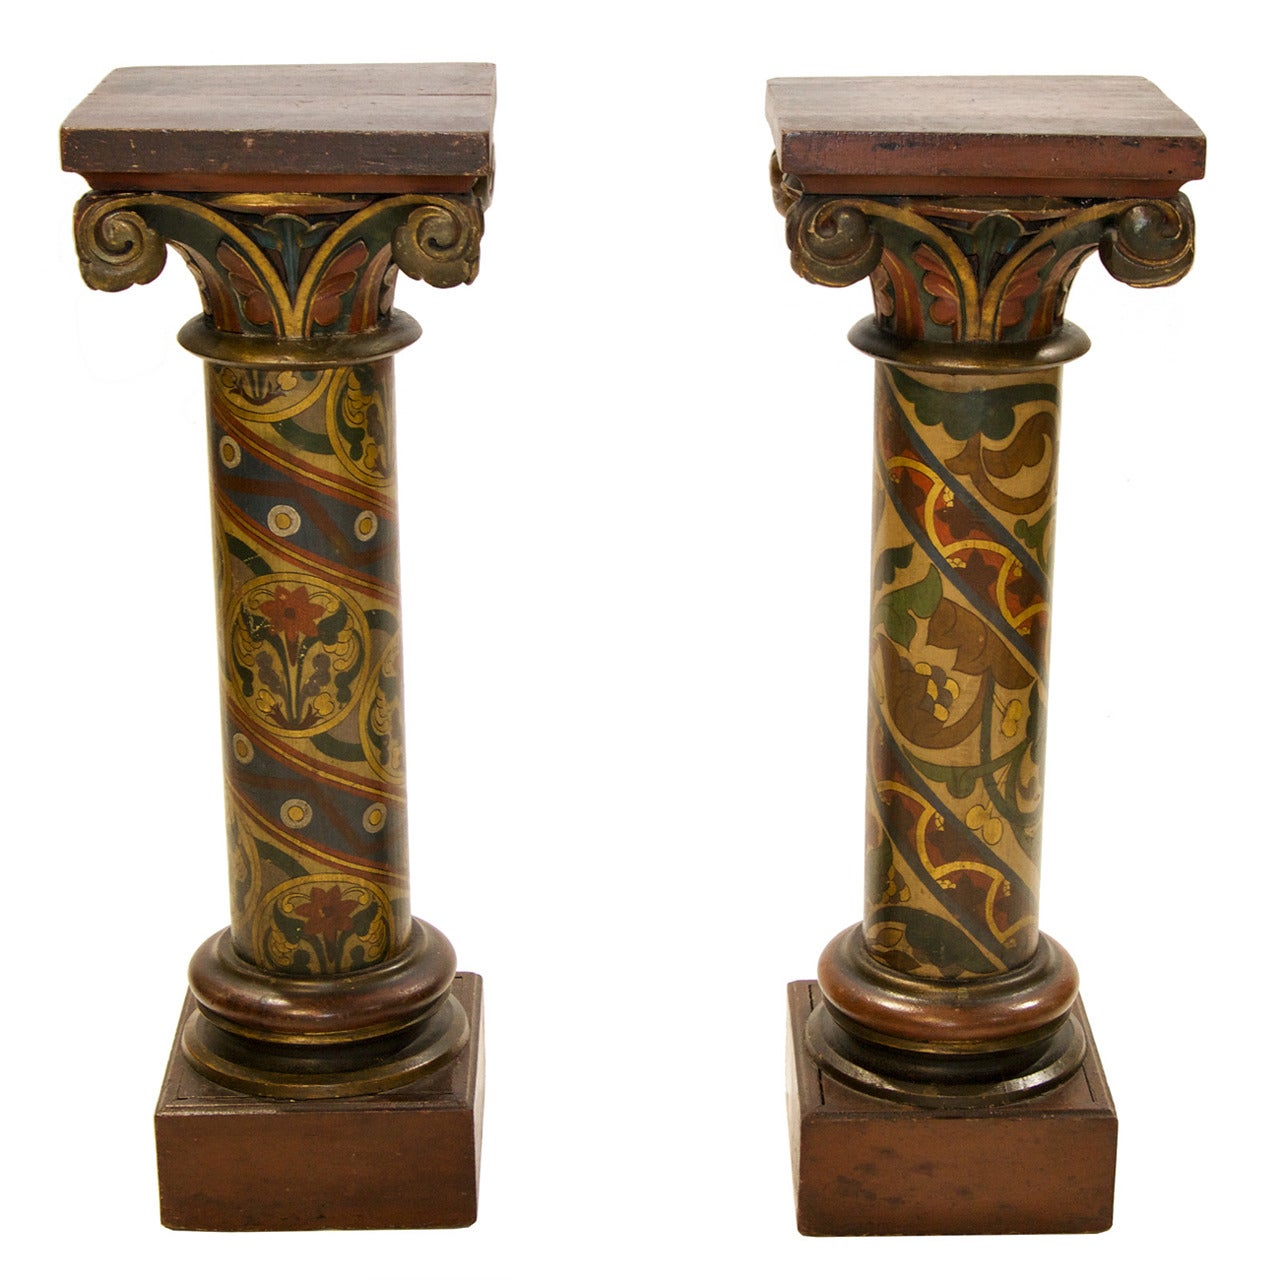 19th Century Pair of Continental Stands in a Polychrome Painted Finish